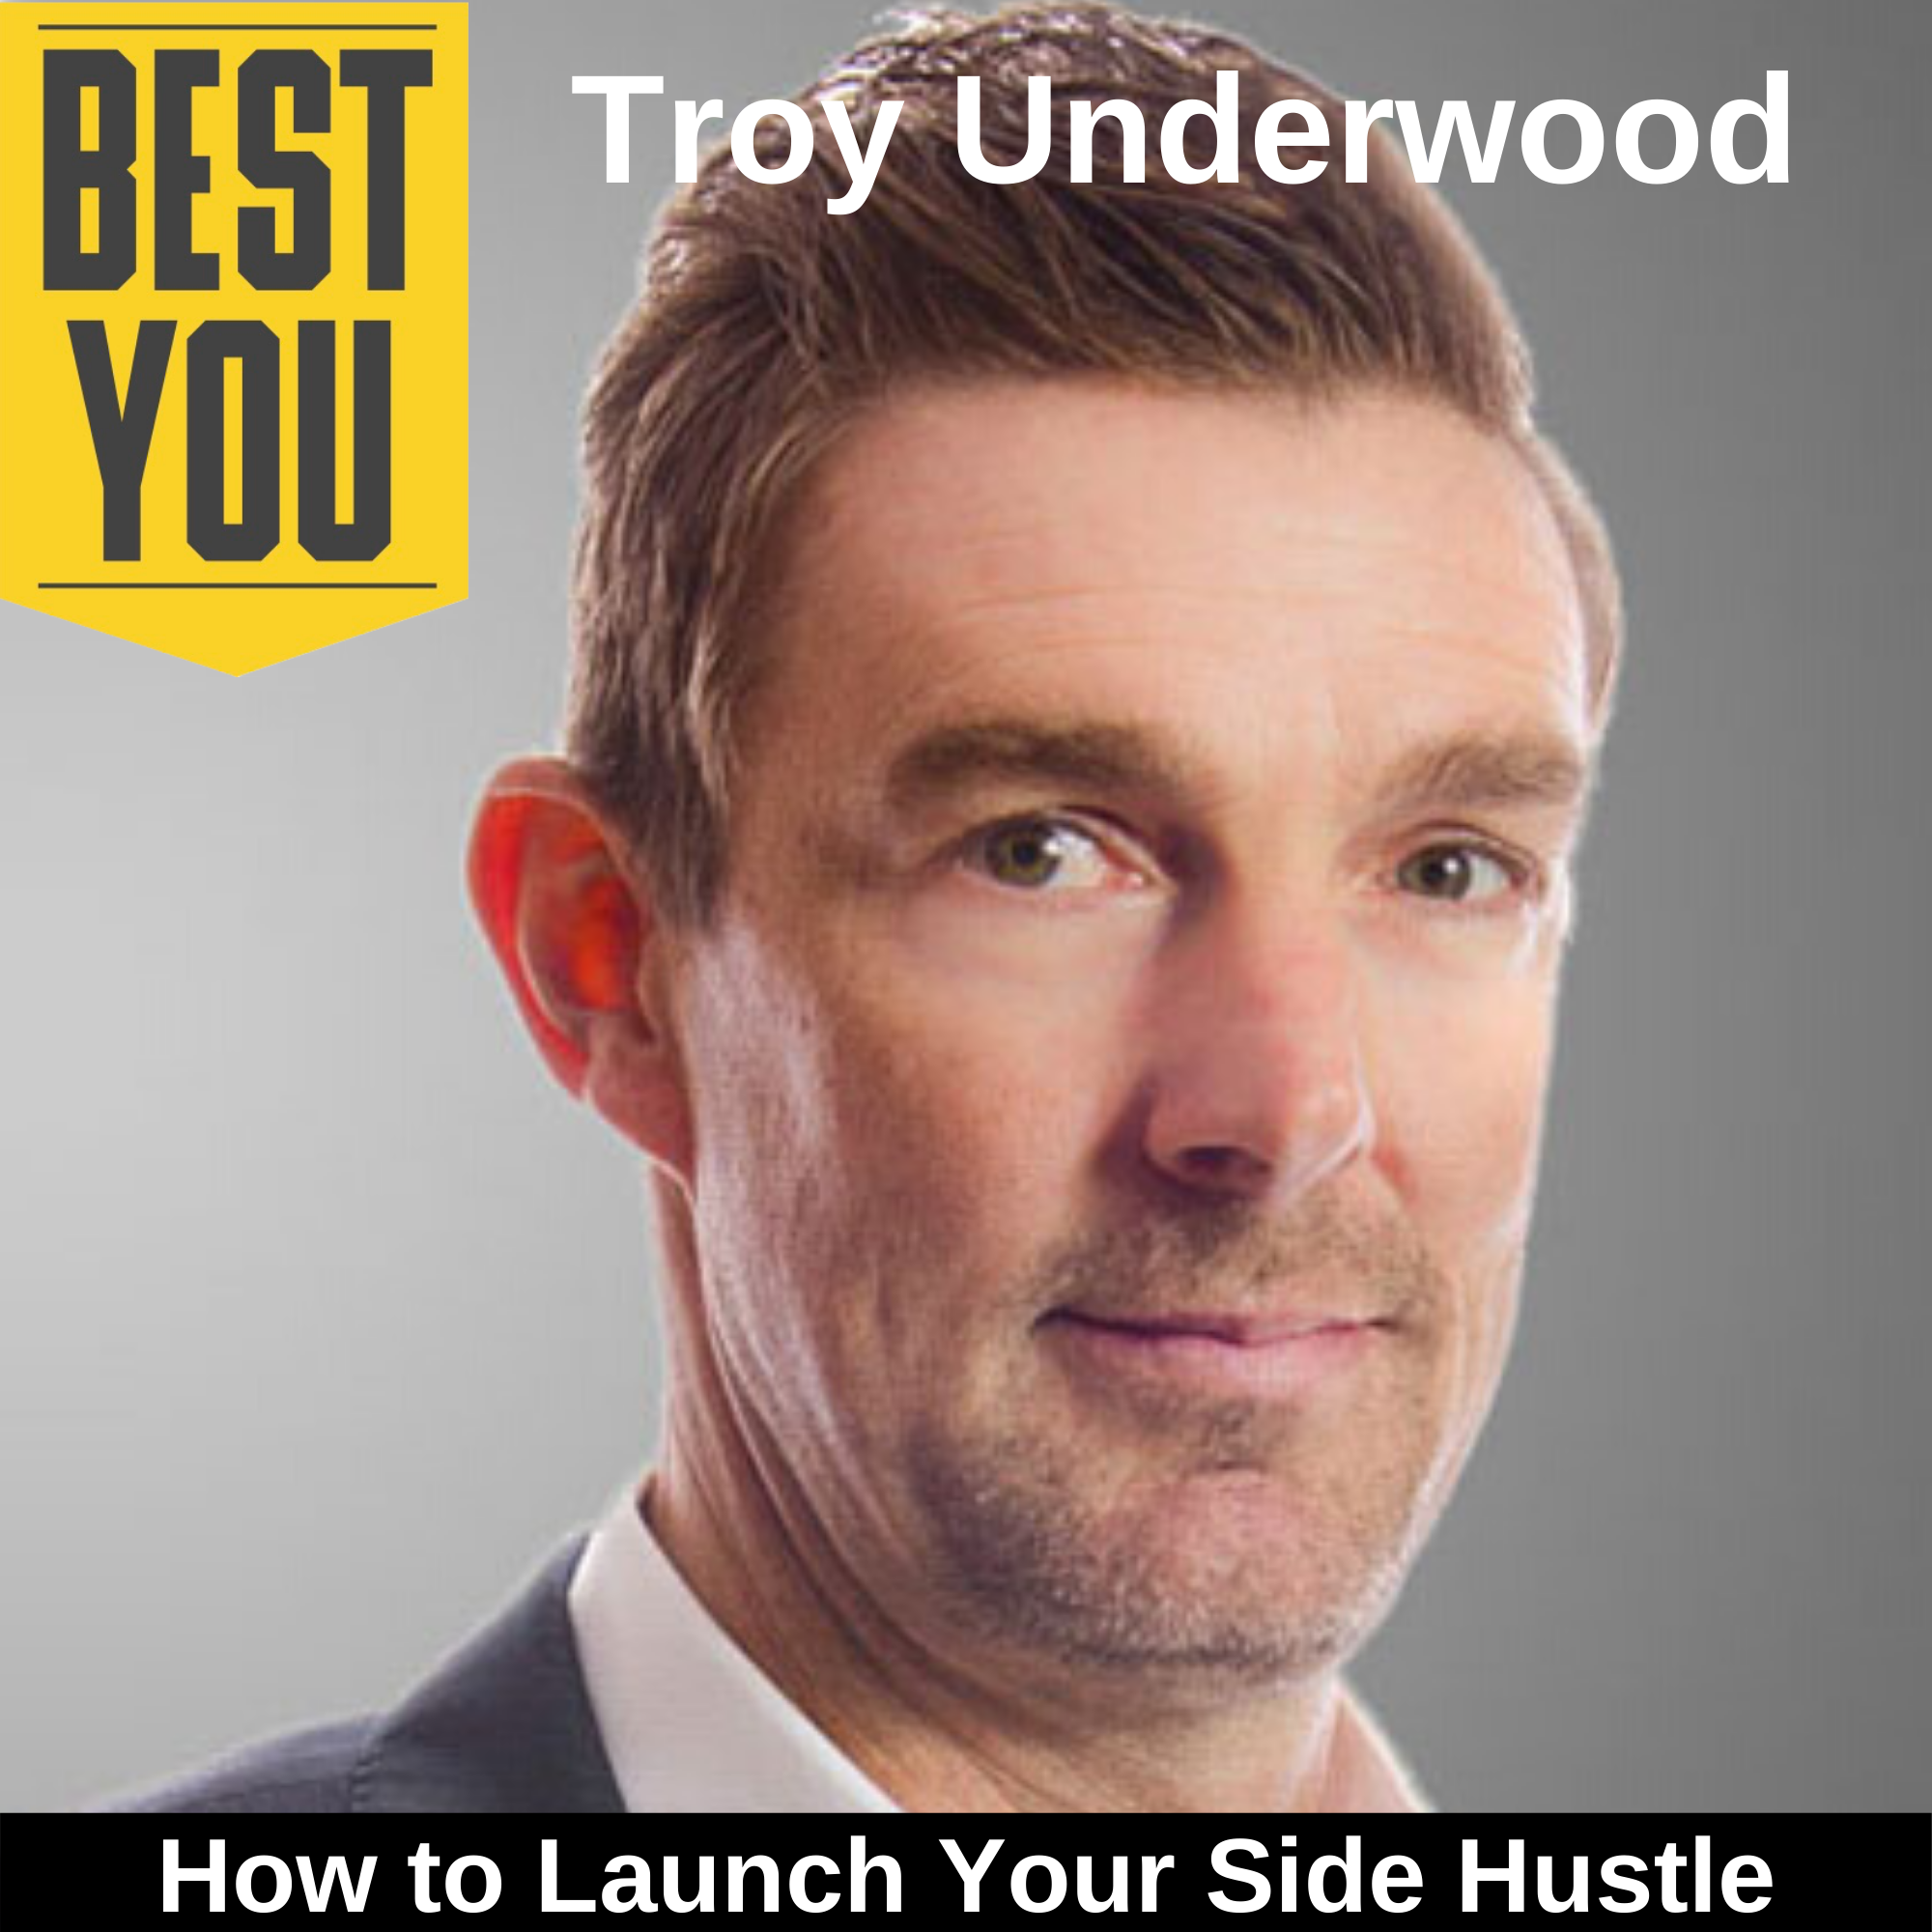 Ep. 169 Troy Underwood - How to Launch Your Side Hustle